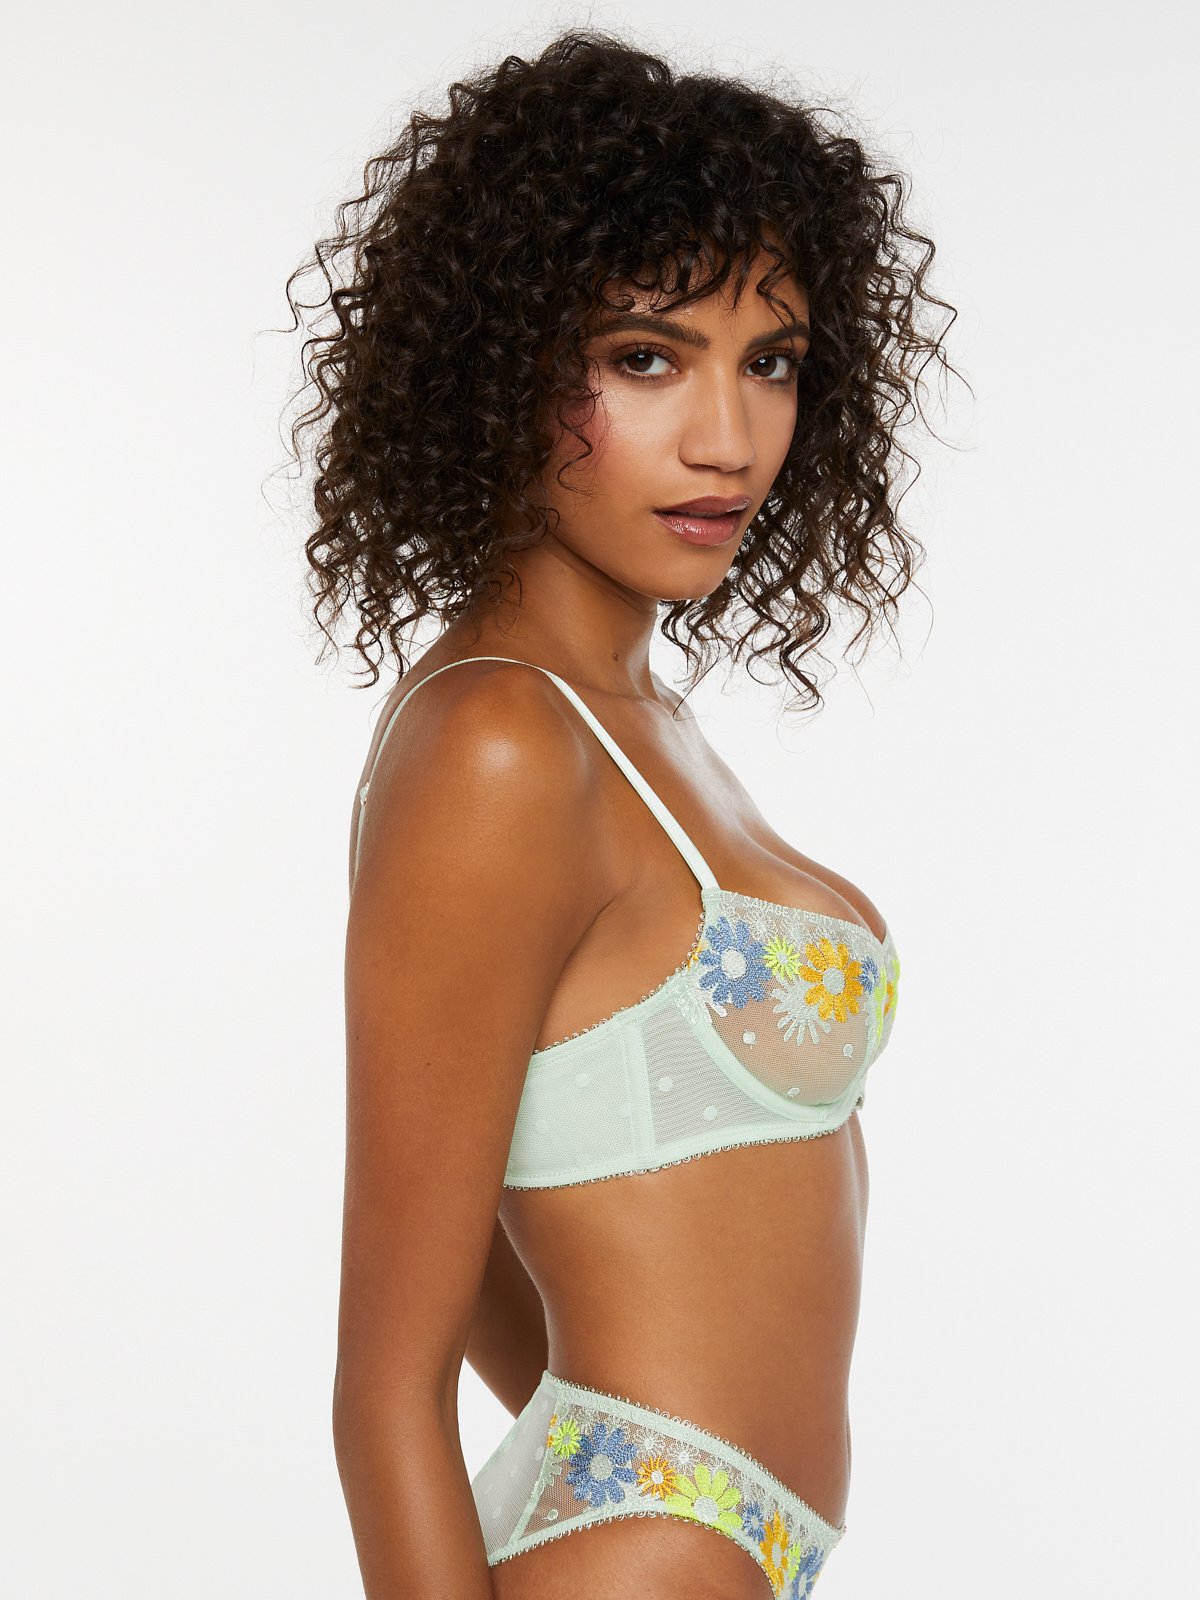 Free Spirit Floral Embroidered Unlined Balconette Bra